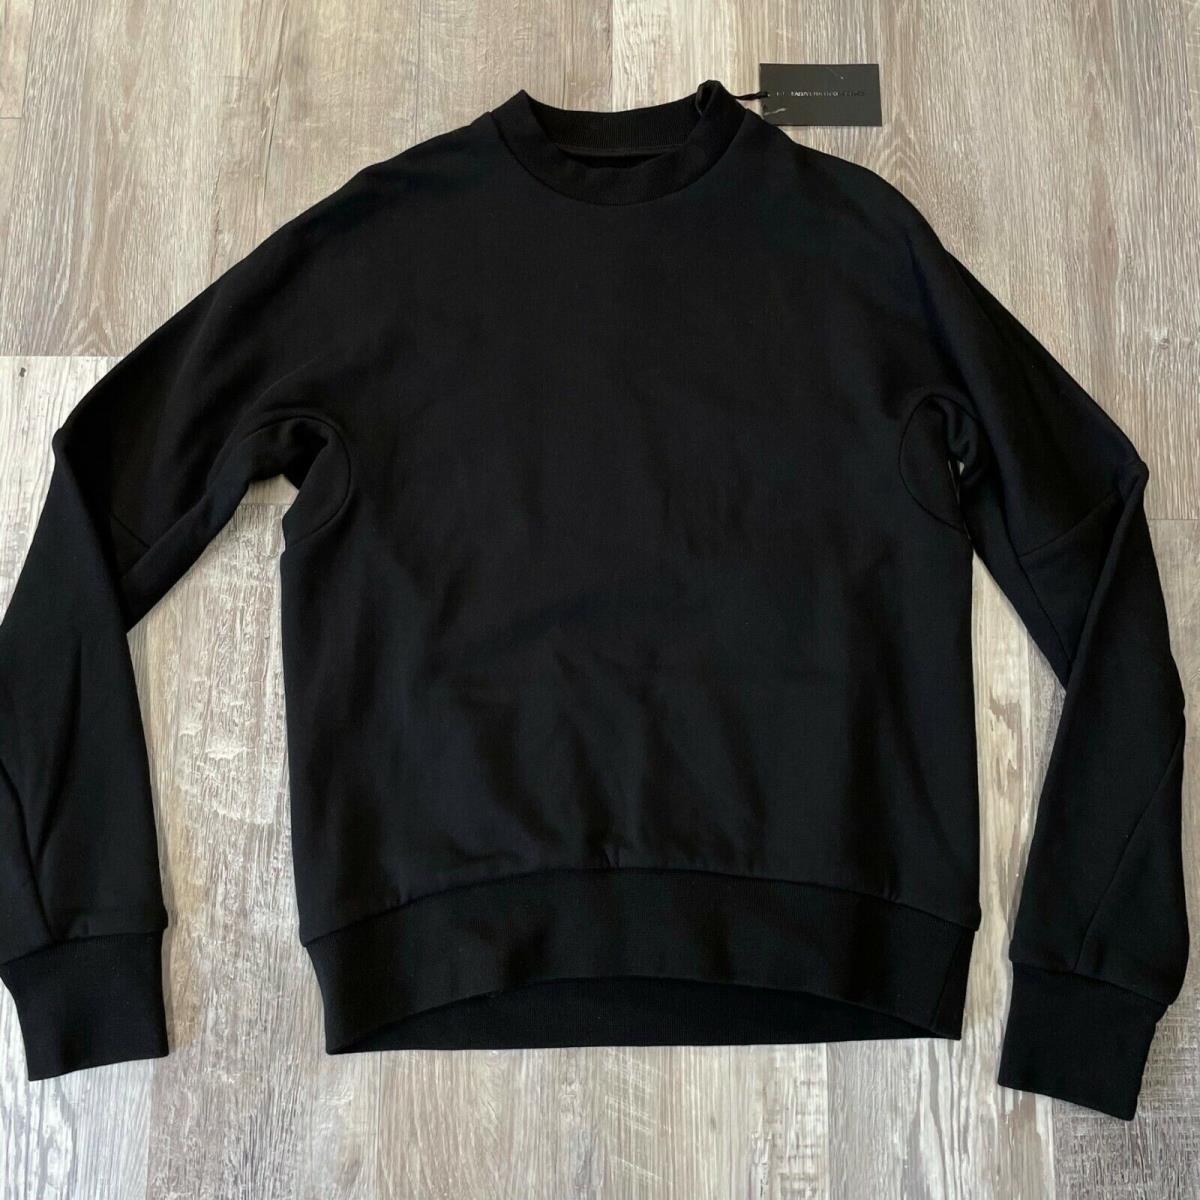 Nike Made in Italy Solid Black Sweatshirt Size S Cotton Every Stitch Considered